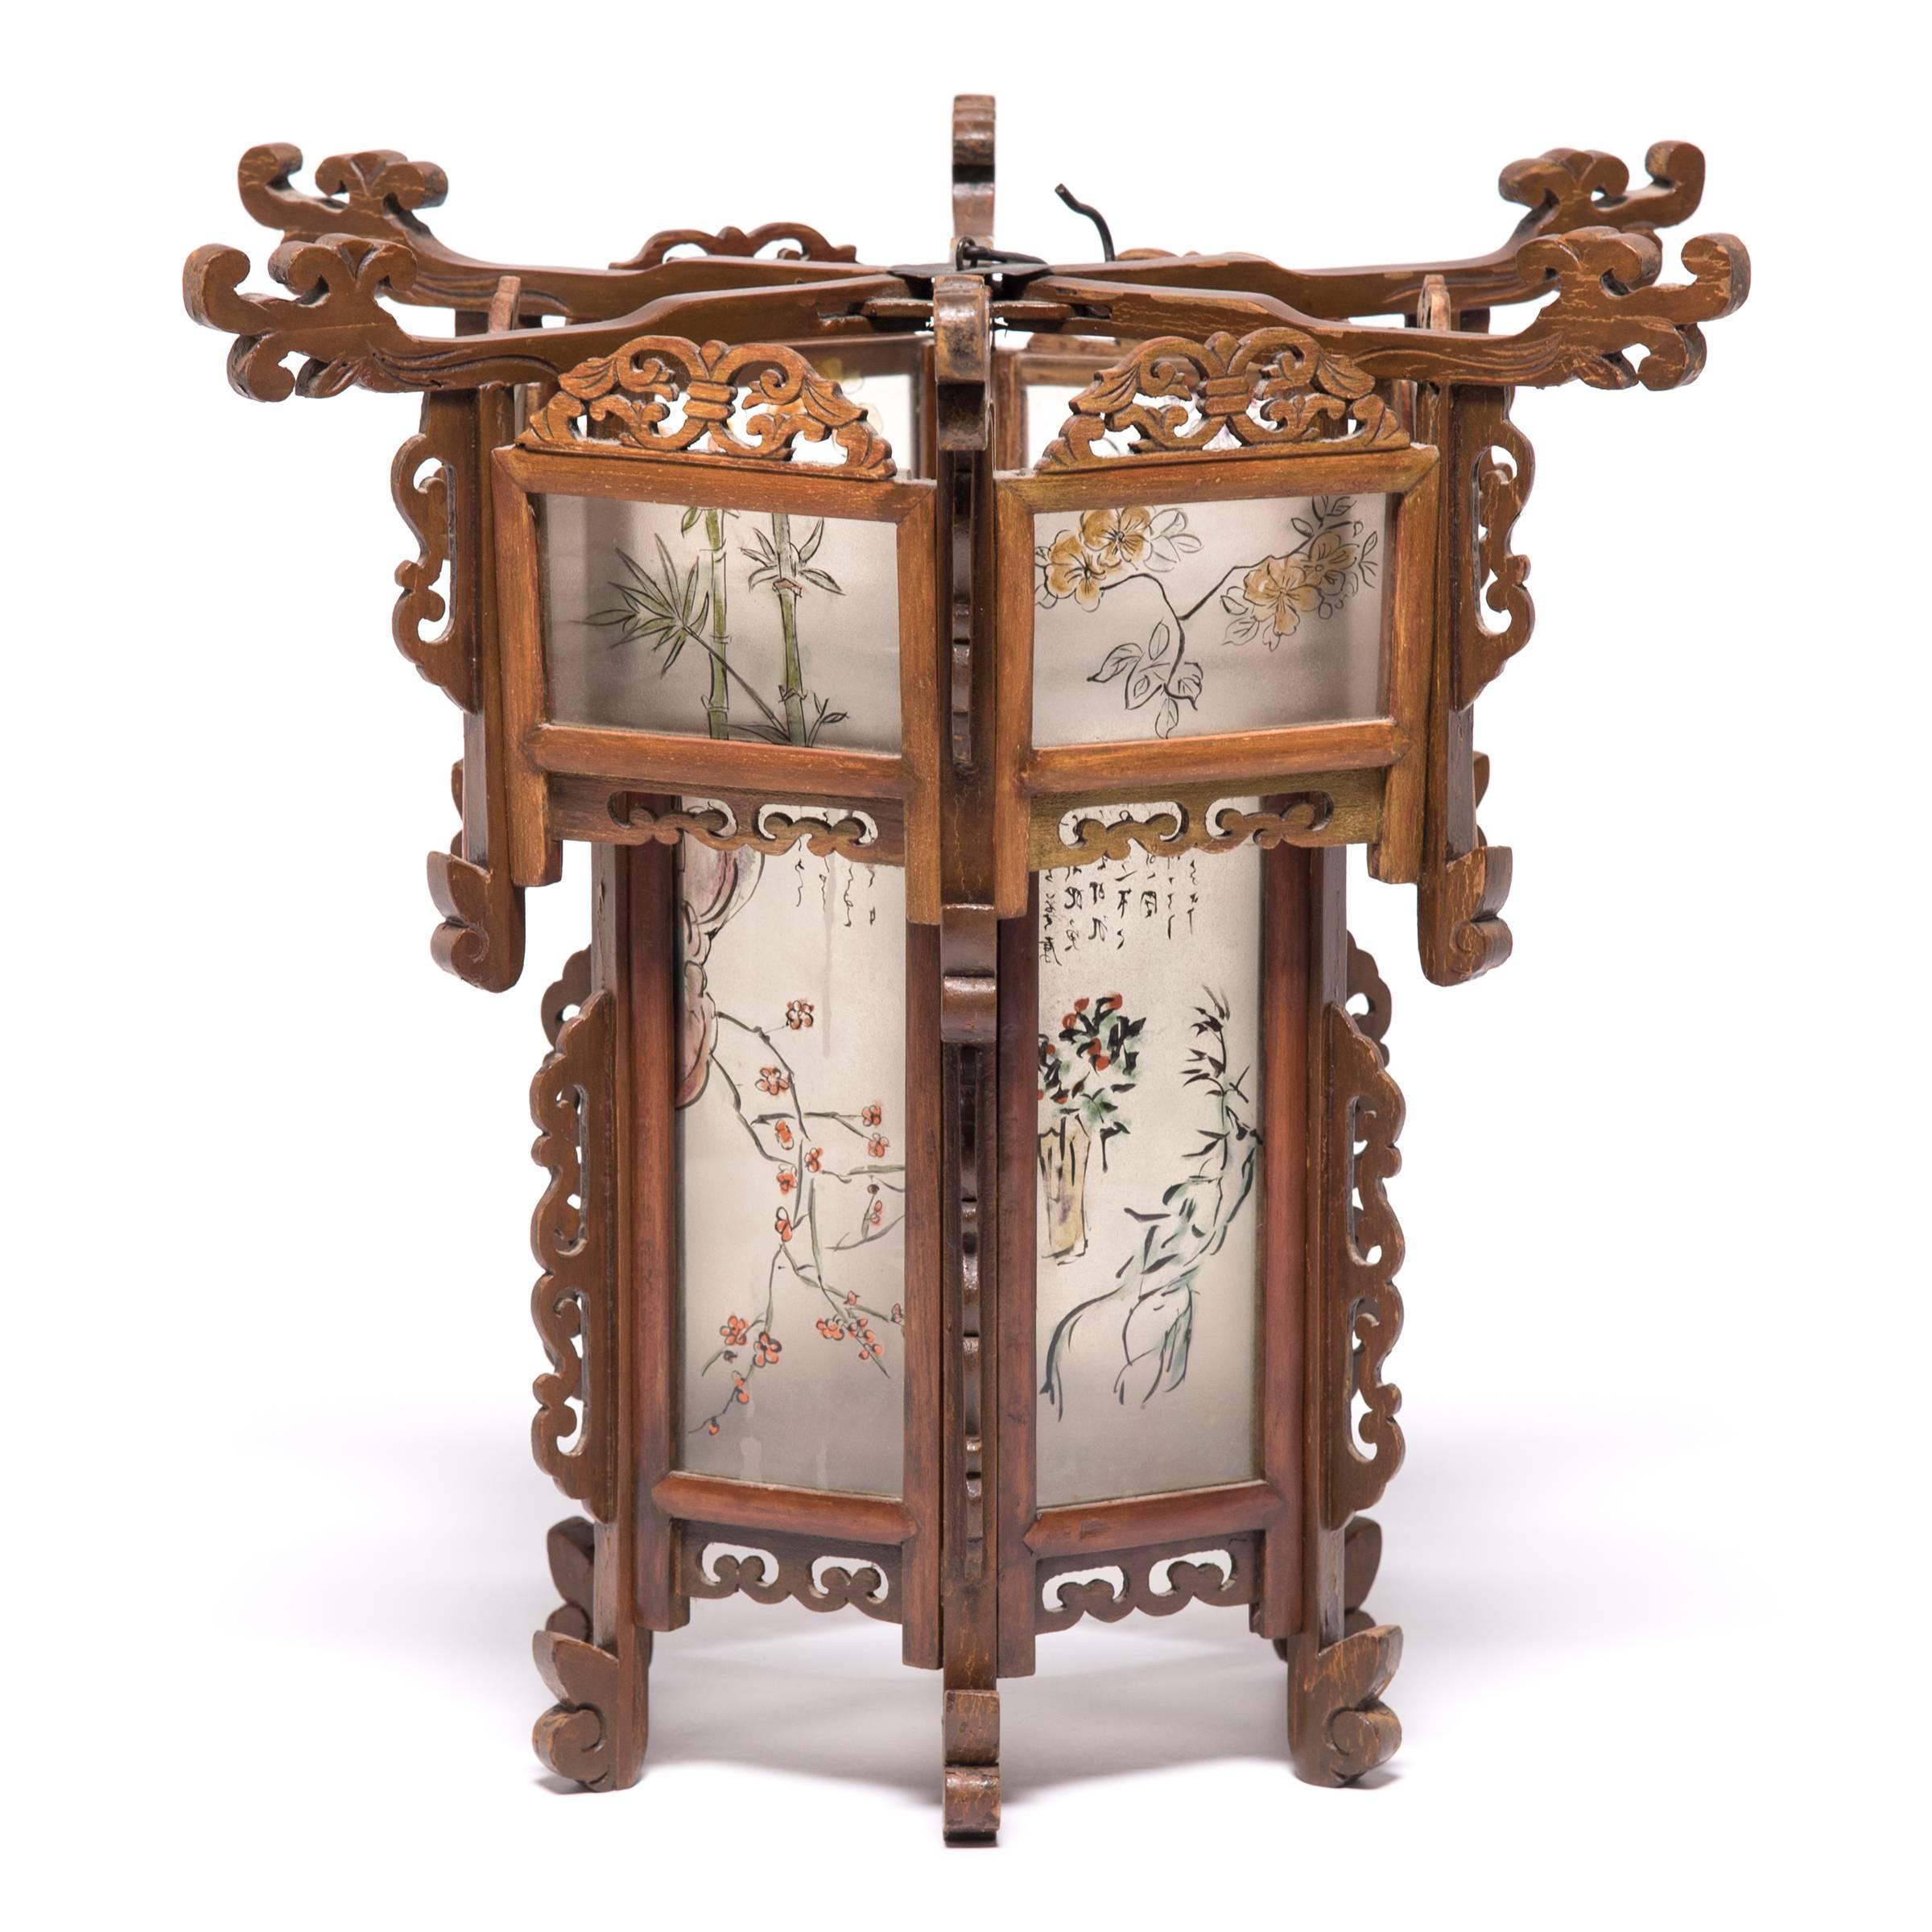 Imagine the magical atmosphere this lantern created, filled with flickering candles to illuminate a very Fine courtyard home in Guangdong province. Intricately carved of prized rosewood, the lantern is made even more exquisite by painted frosted